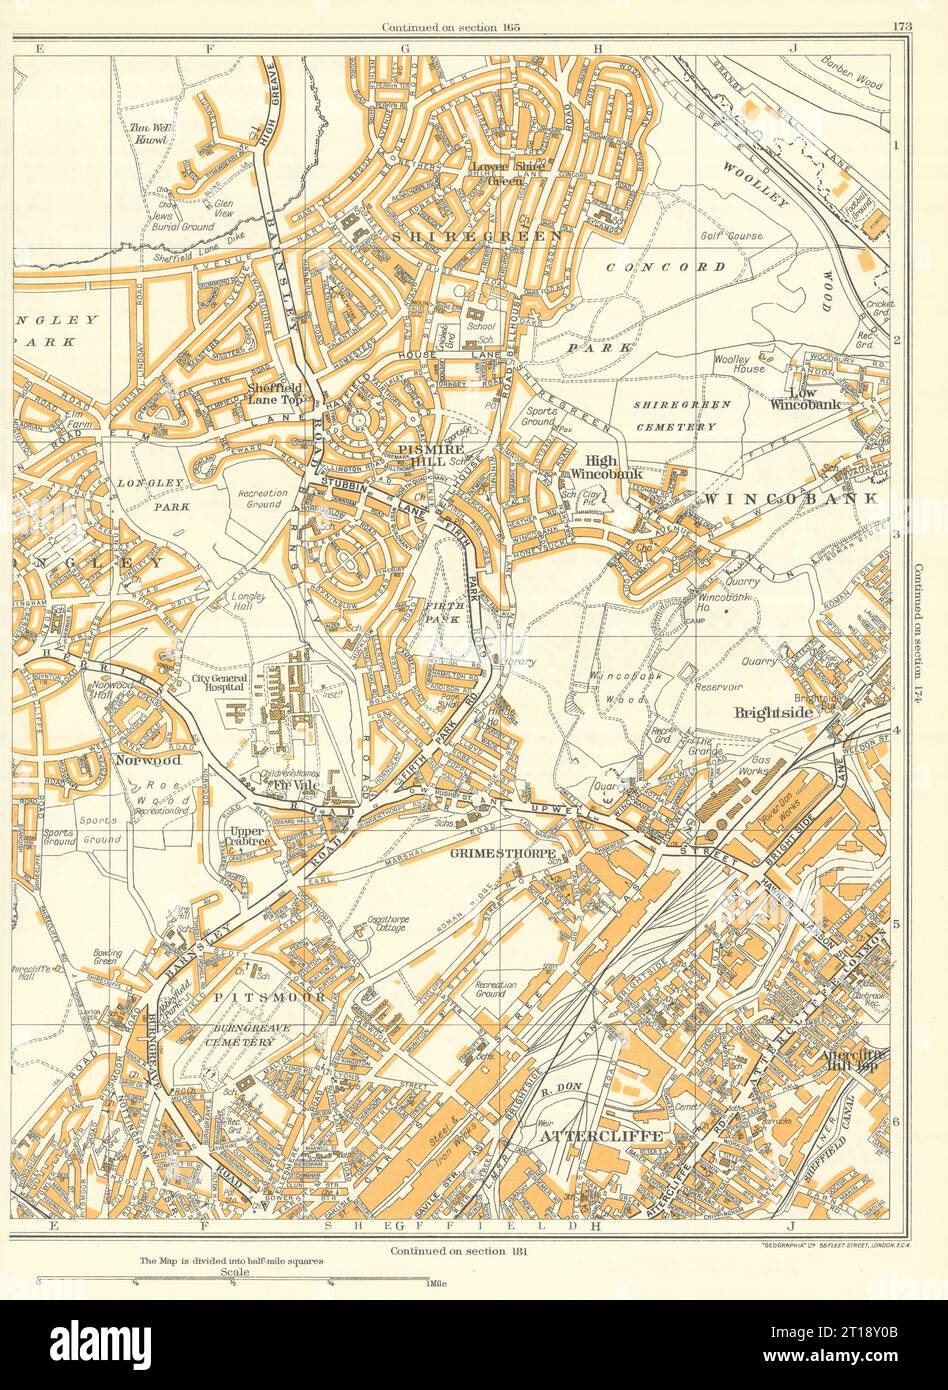 SHEFFIELD Wincobank Grimesthorpe Attercliffe Shiregreen Longley 1935 old map Stock Photo